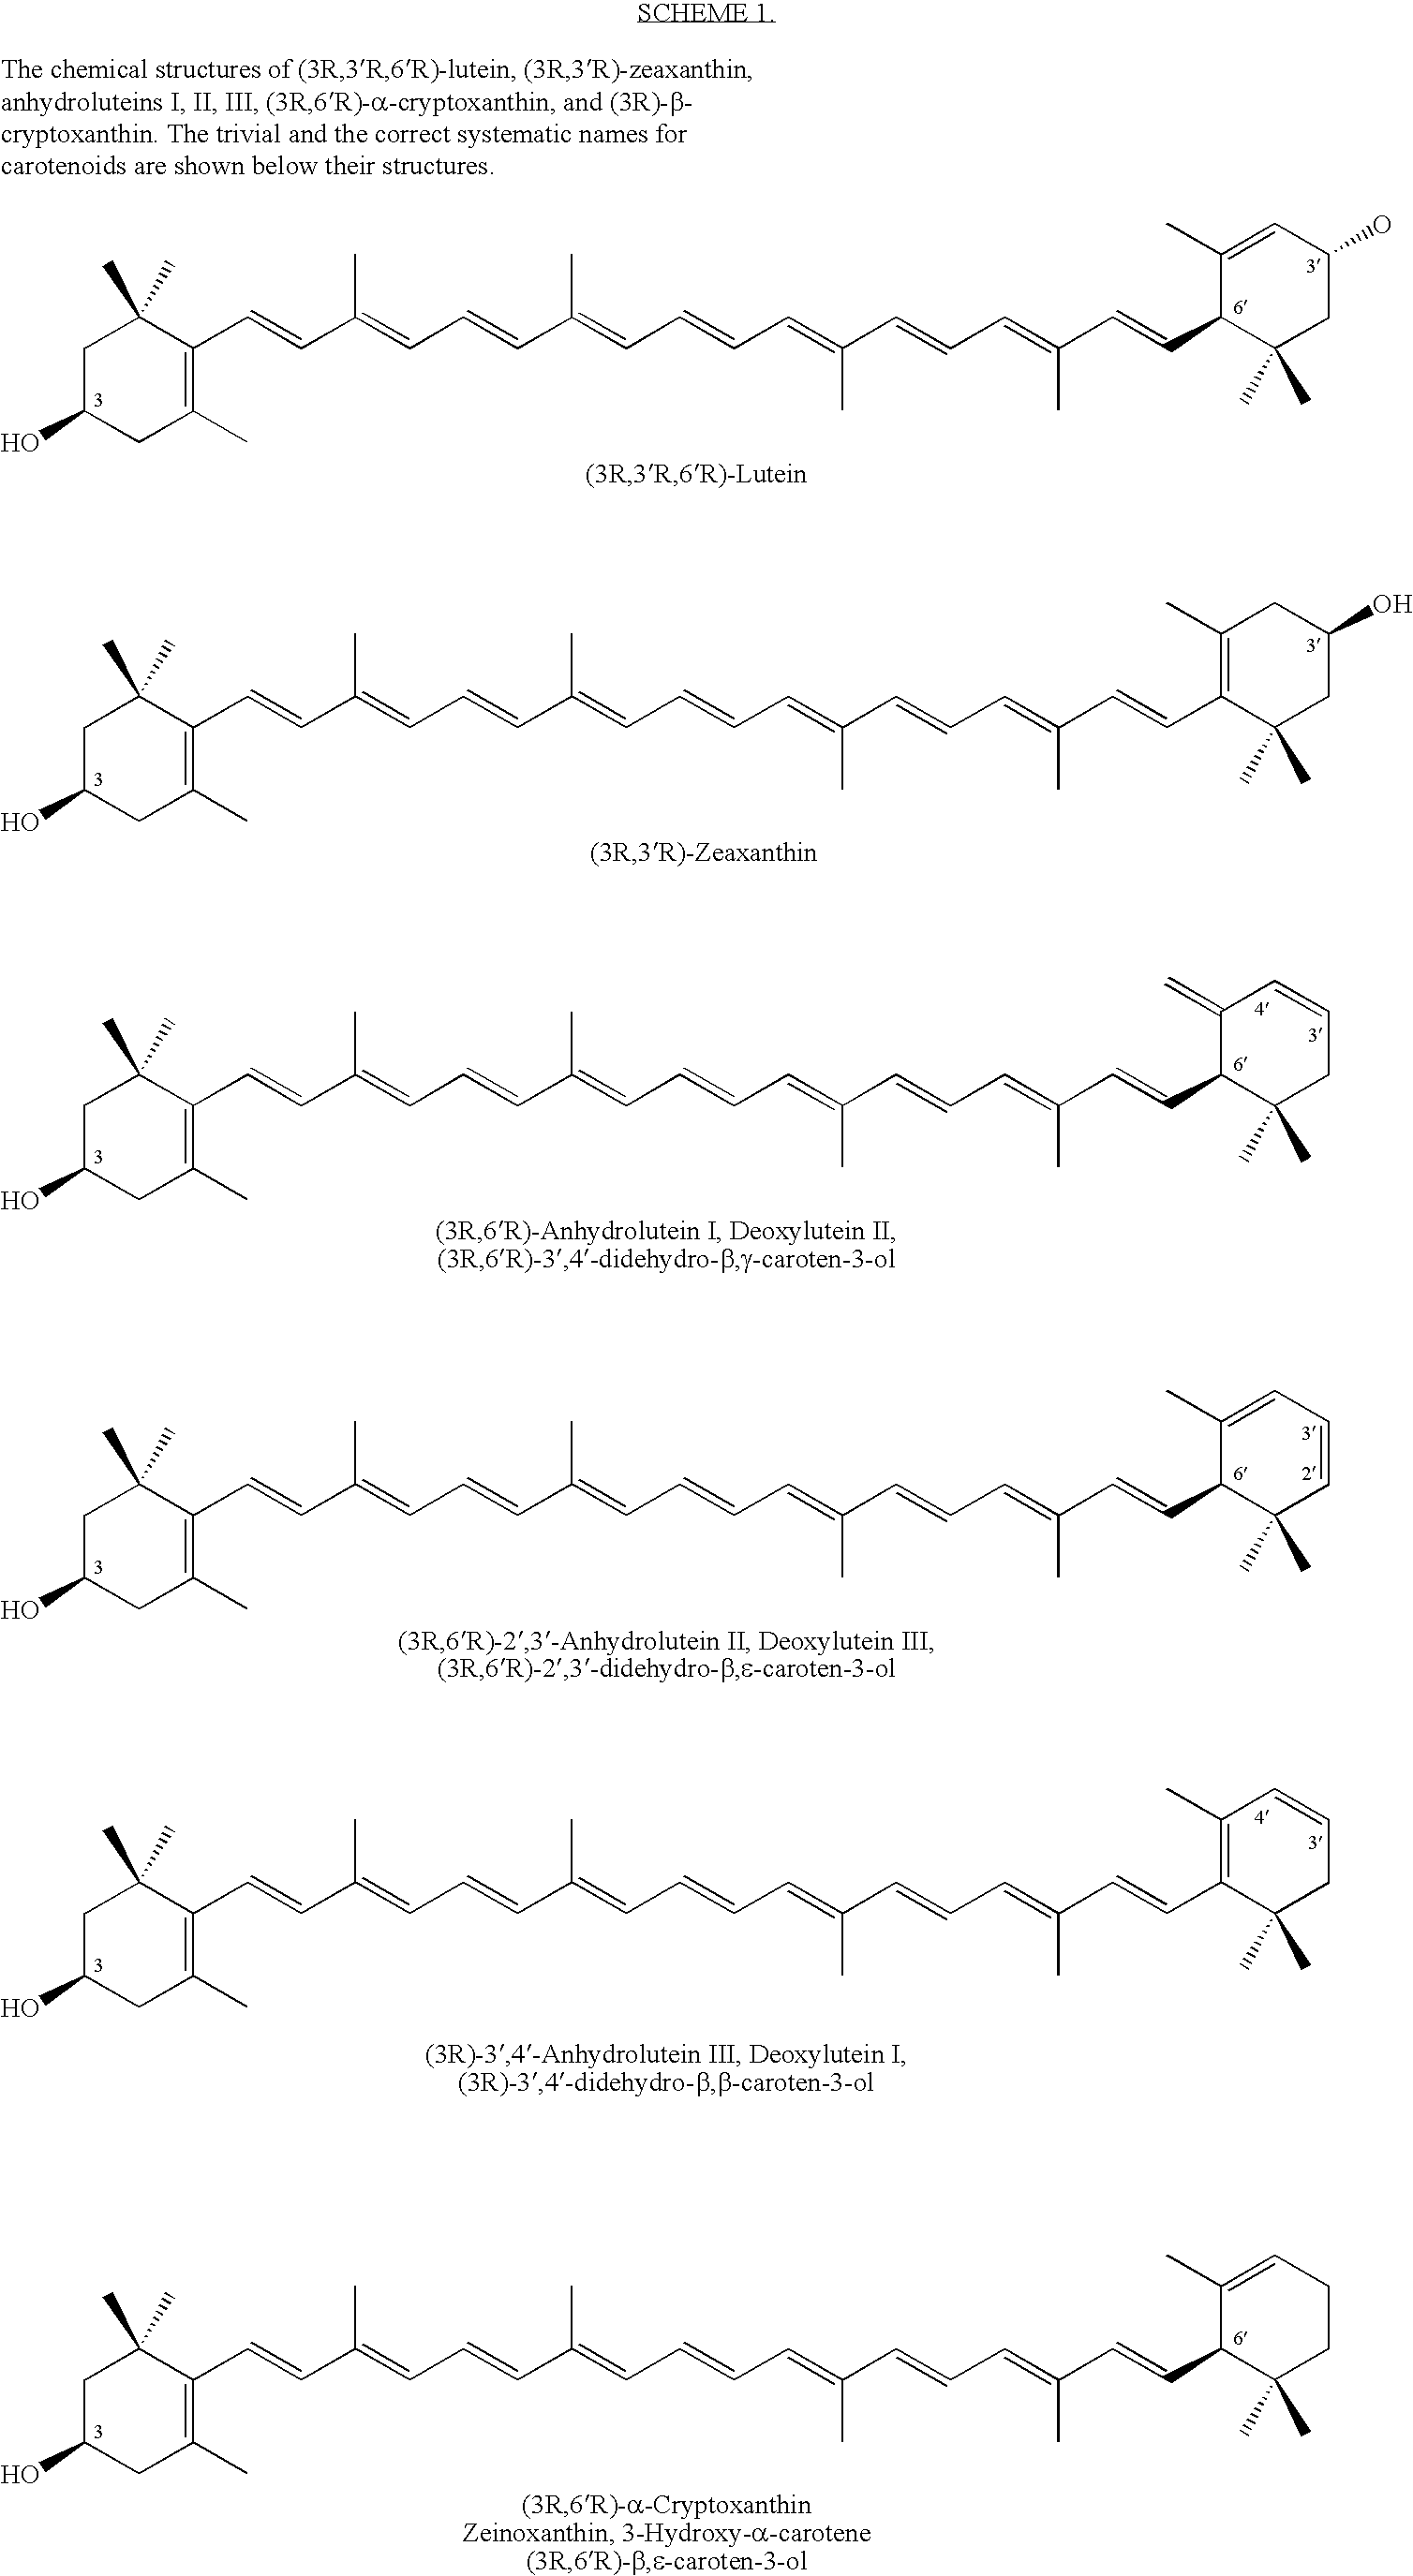 Method for production of rare carotenoids from commercially available lutein